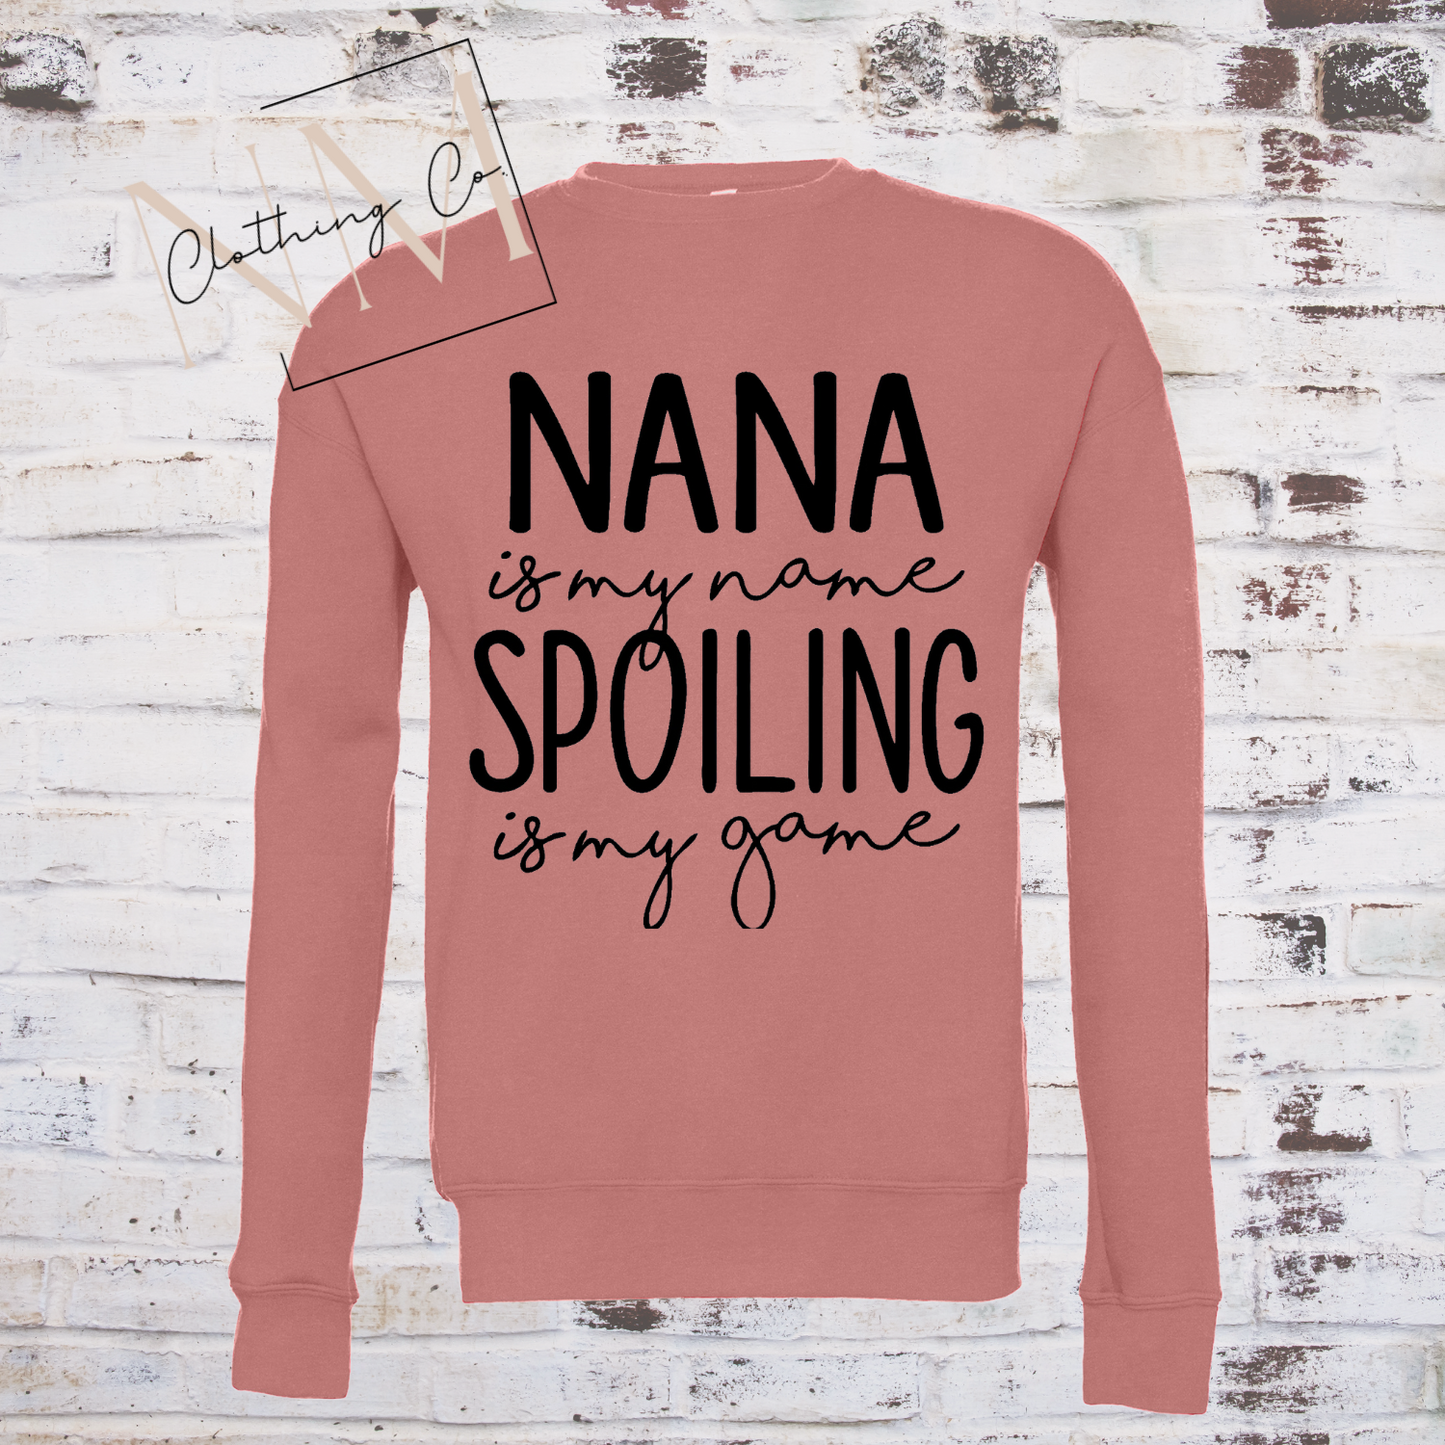 Nana Is My Name Spoiling Is My Game Sweater